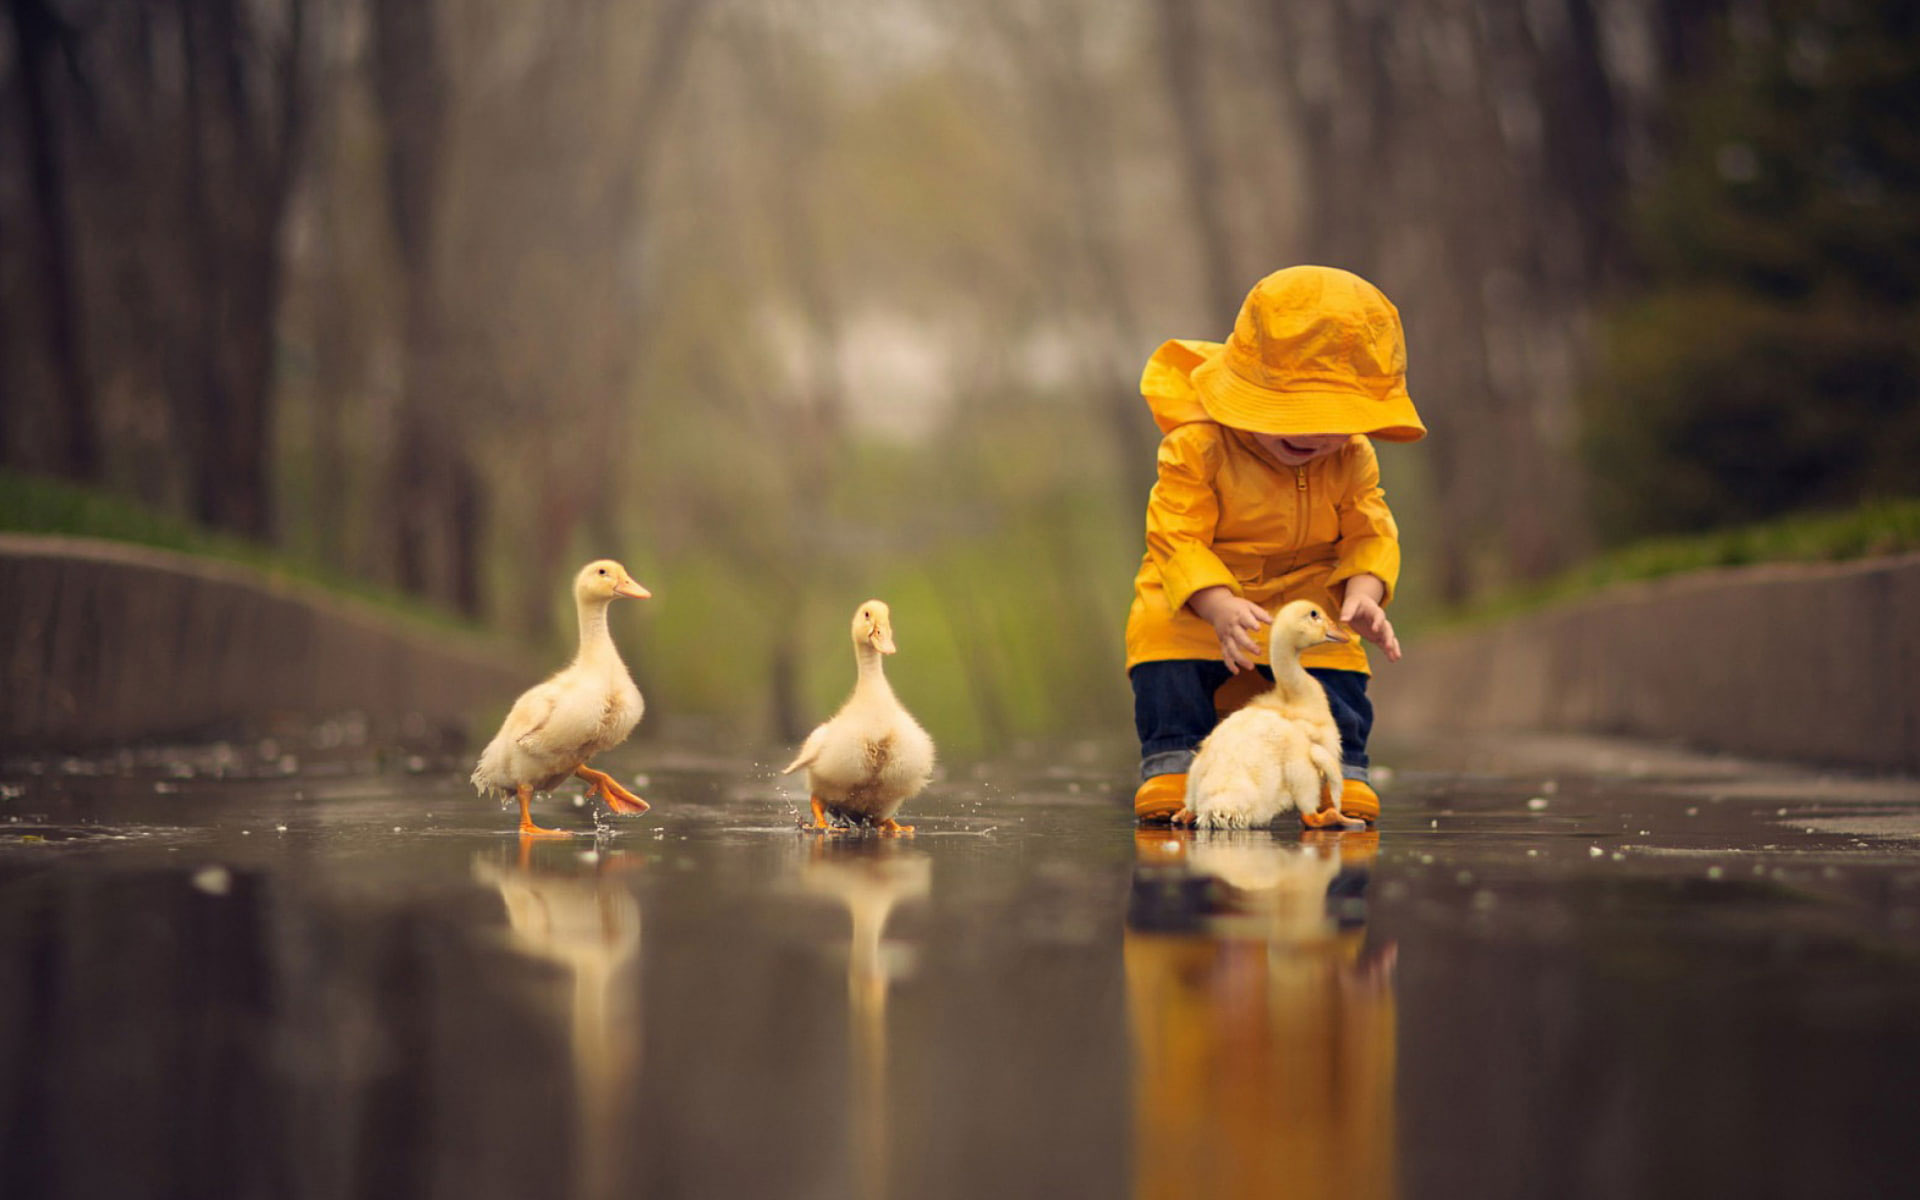 People wallpaper, childhood, rain, children, cubs, goose, play, funny